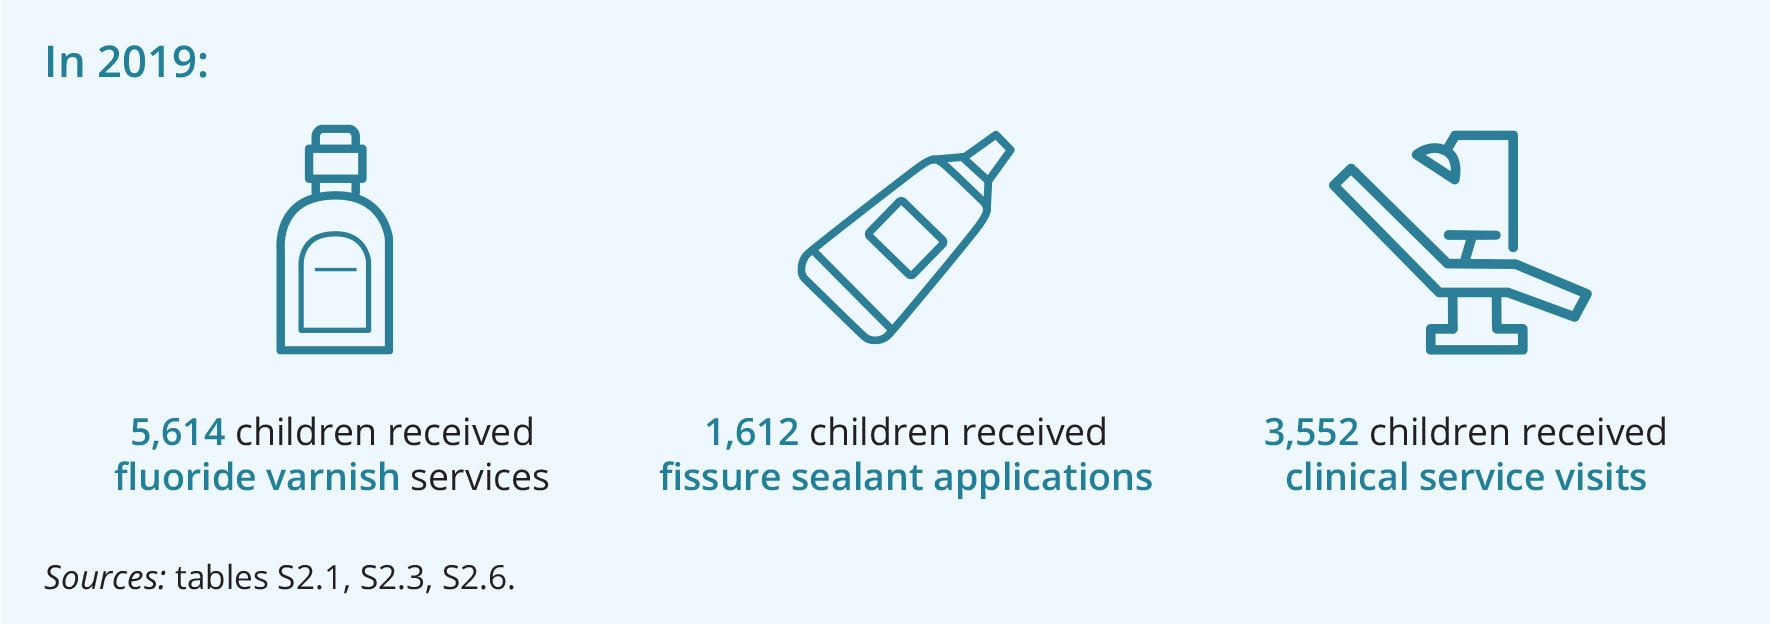 The infographic shows that, in 2019: 5,614 children received fluoride varnish services; 1,612 children received fissure sealant applications; 3,552 children received clinical service visits.